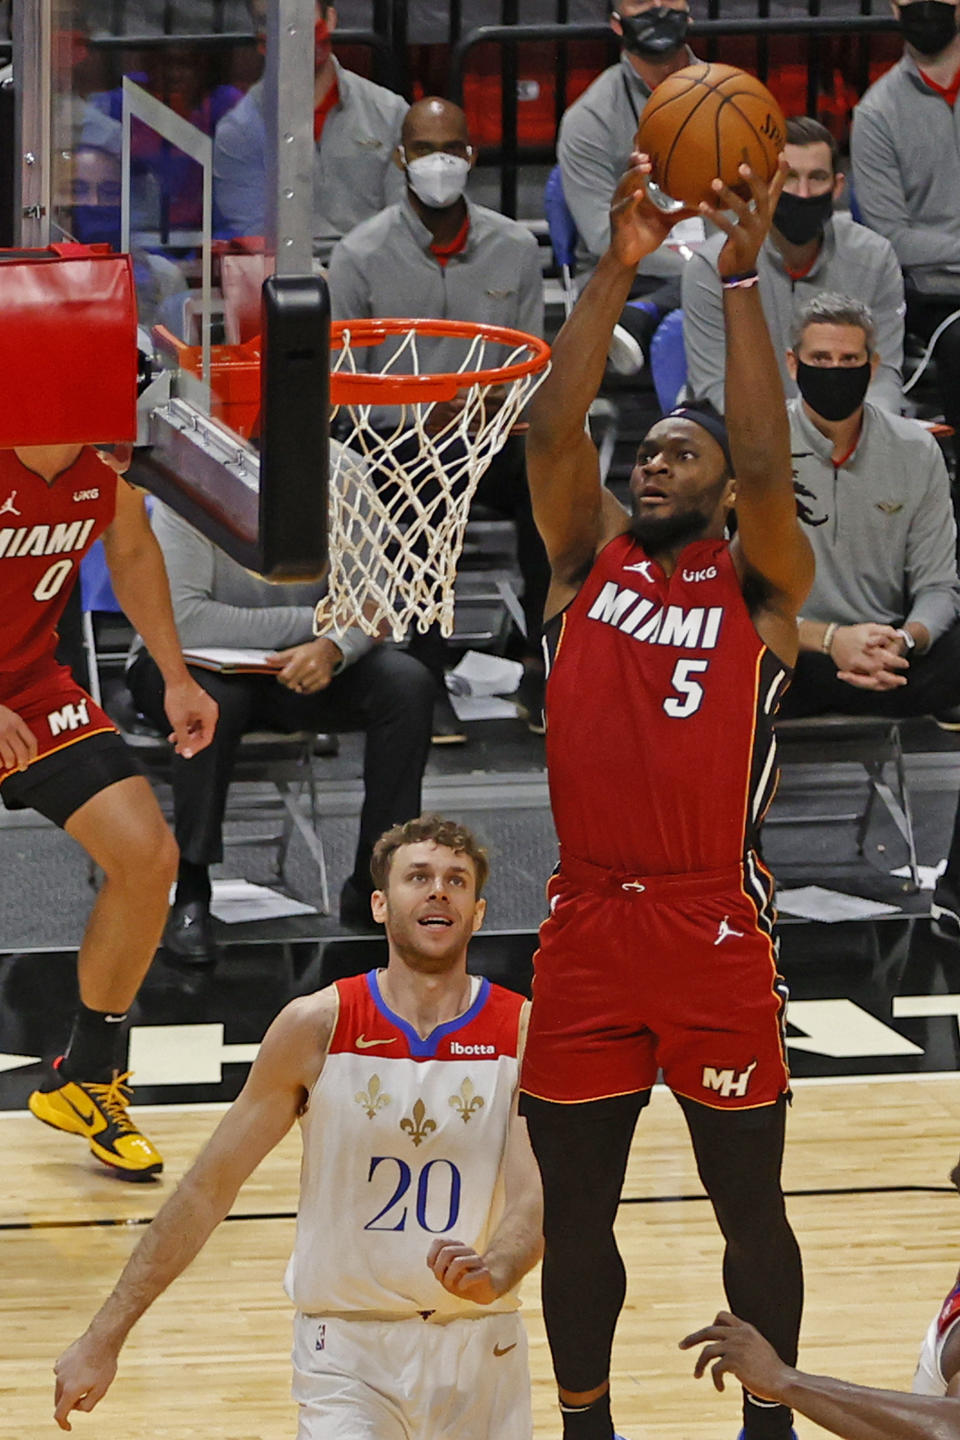 New Orleans Pelicans forward Nicolo Melli (20) looks up as Miami Heat forward Precious Achiuwa (5) goes to the basket during the second half of an NBA basketball game, Friday, Dec. 25, 2020, in Miami. (AP Photo/Joel Auerbach)